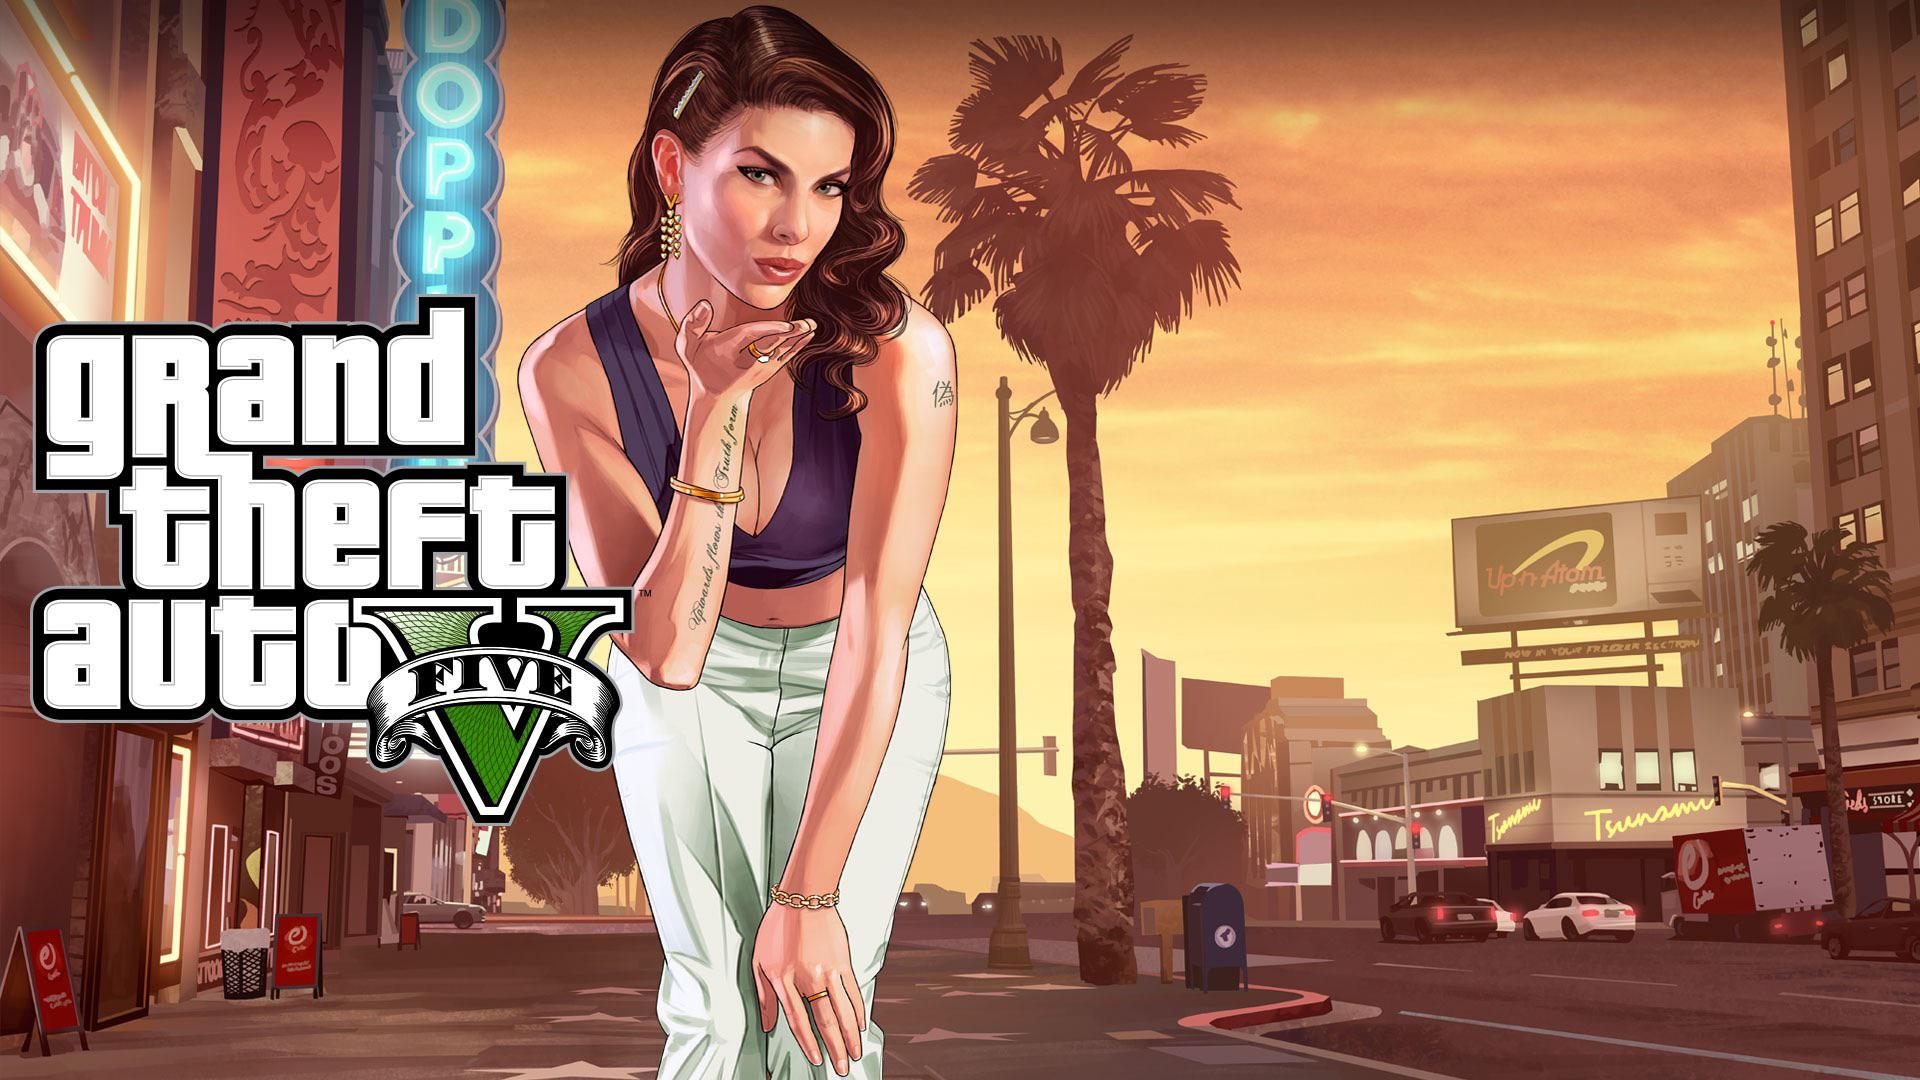 GTA 5 Systeemvereisten: Load Screen for Game with Femme Character Blowing Kiss naast Logo